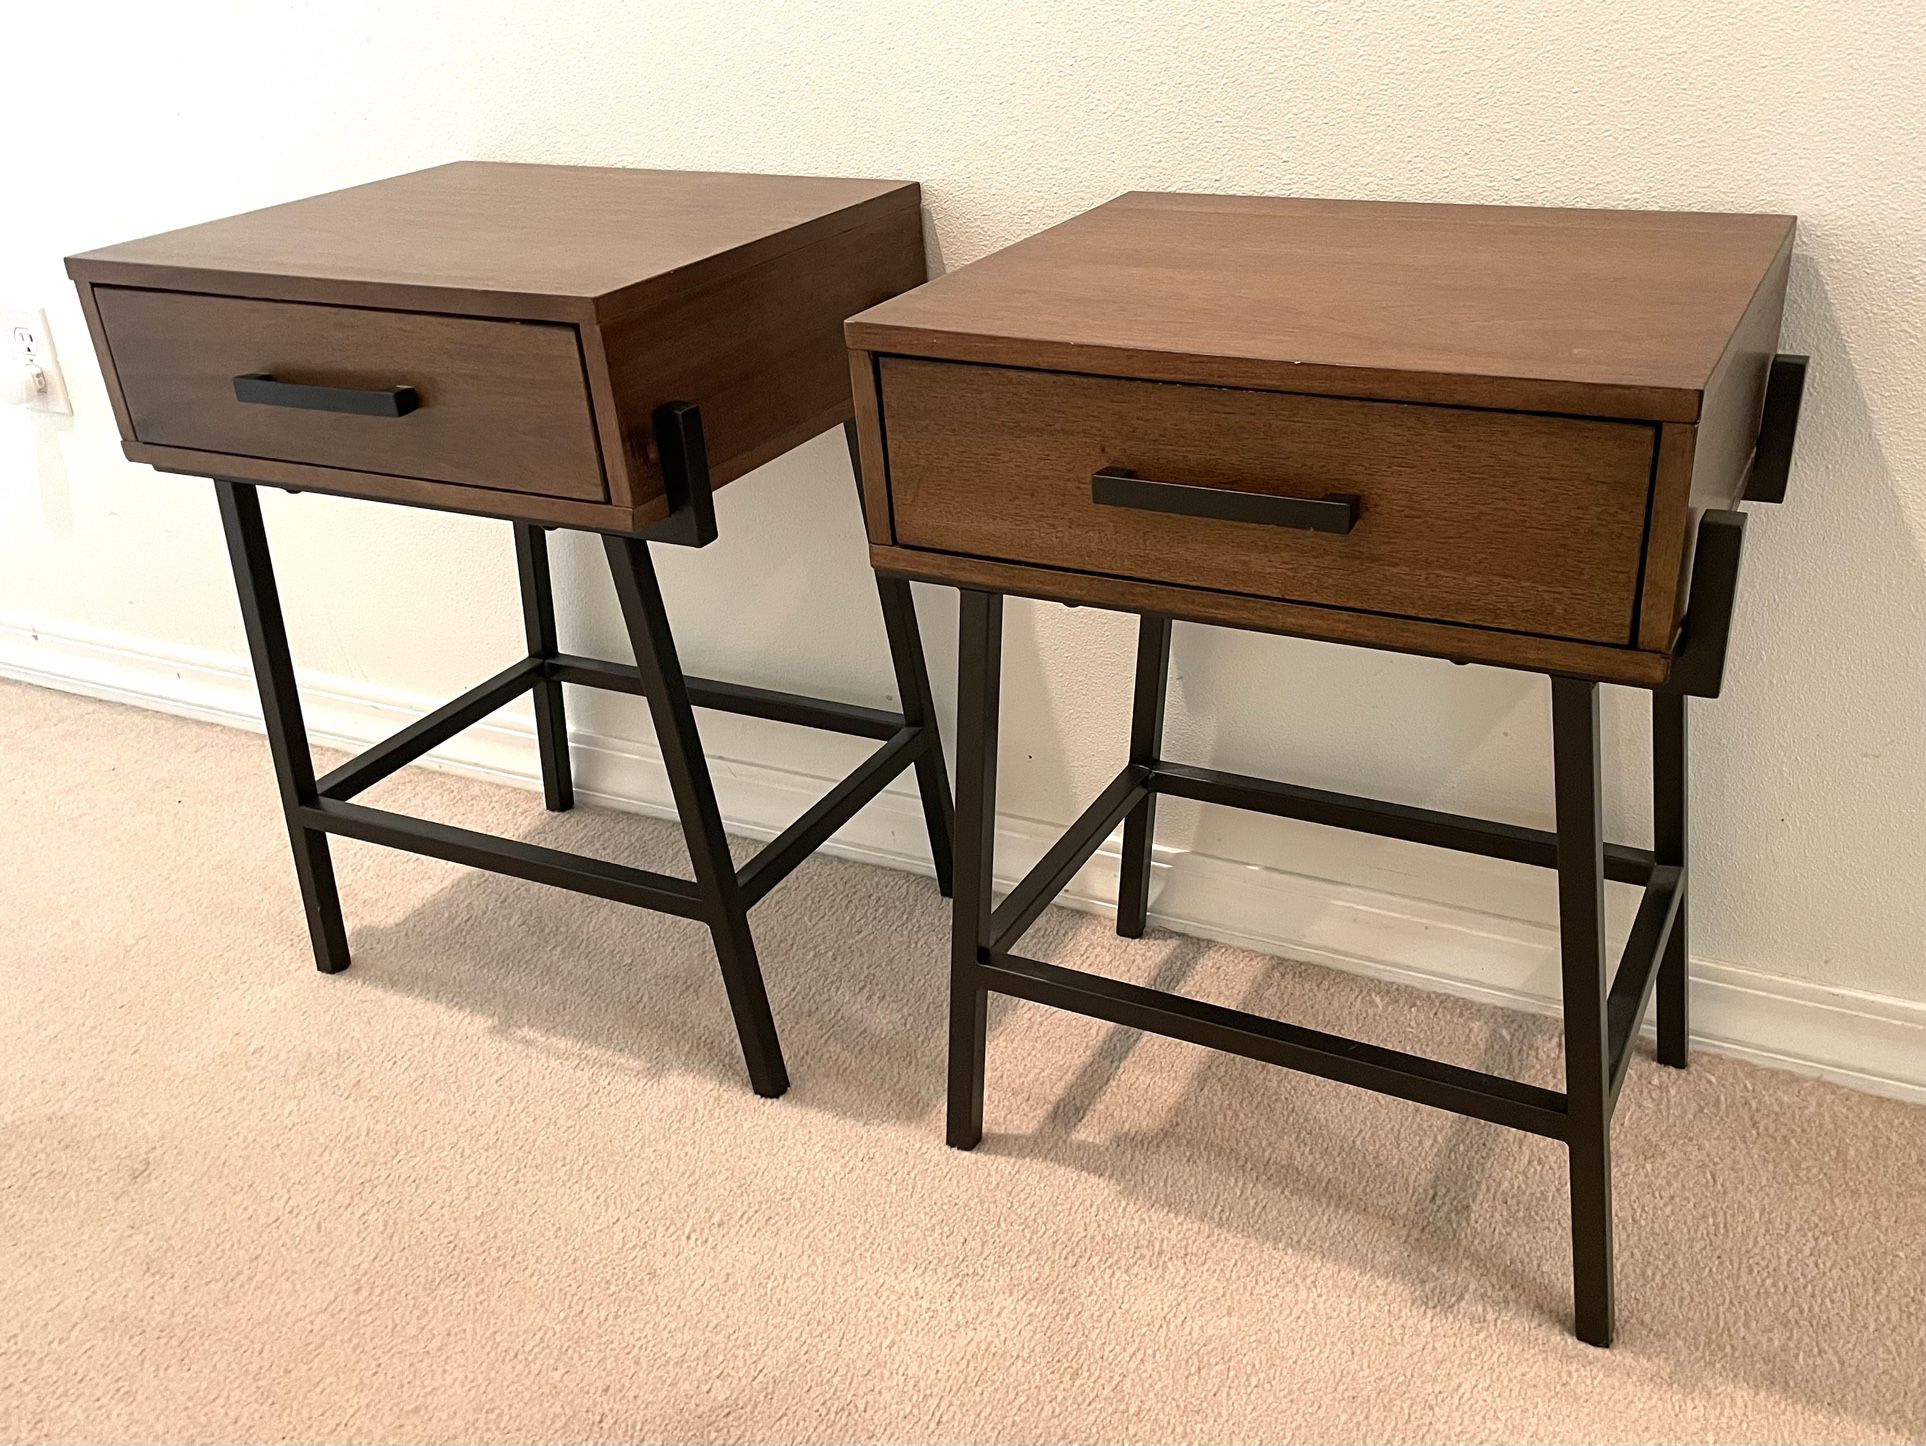 Two Matching Nightstands or Side Tables